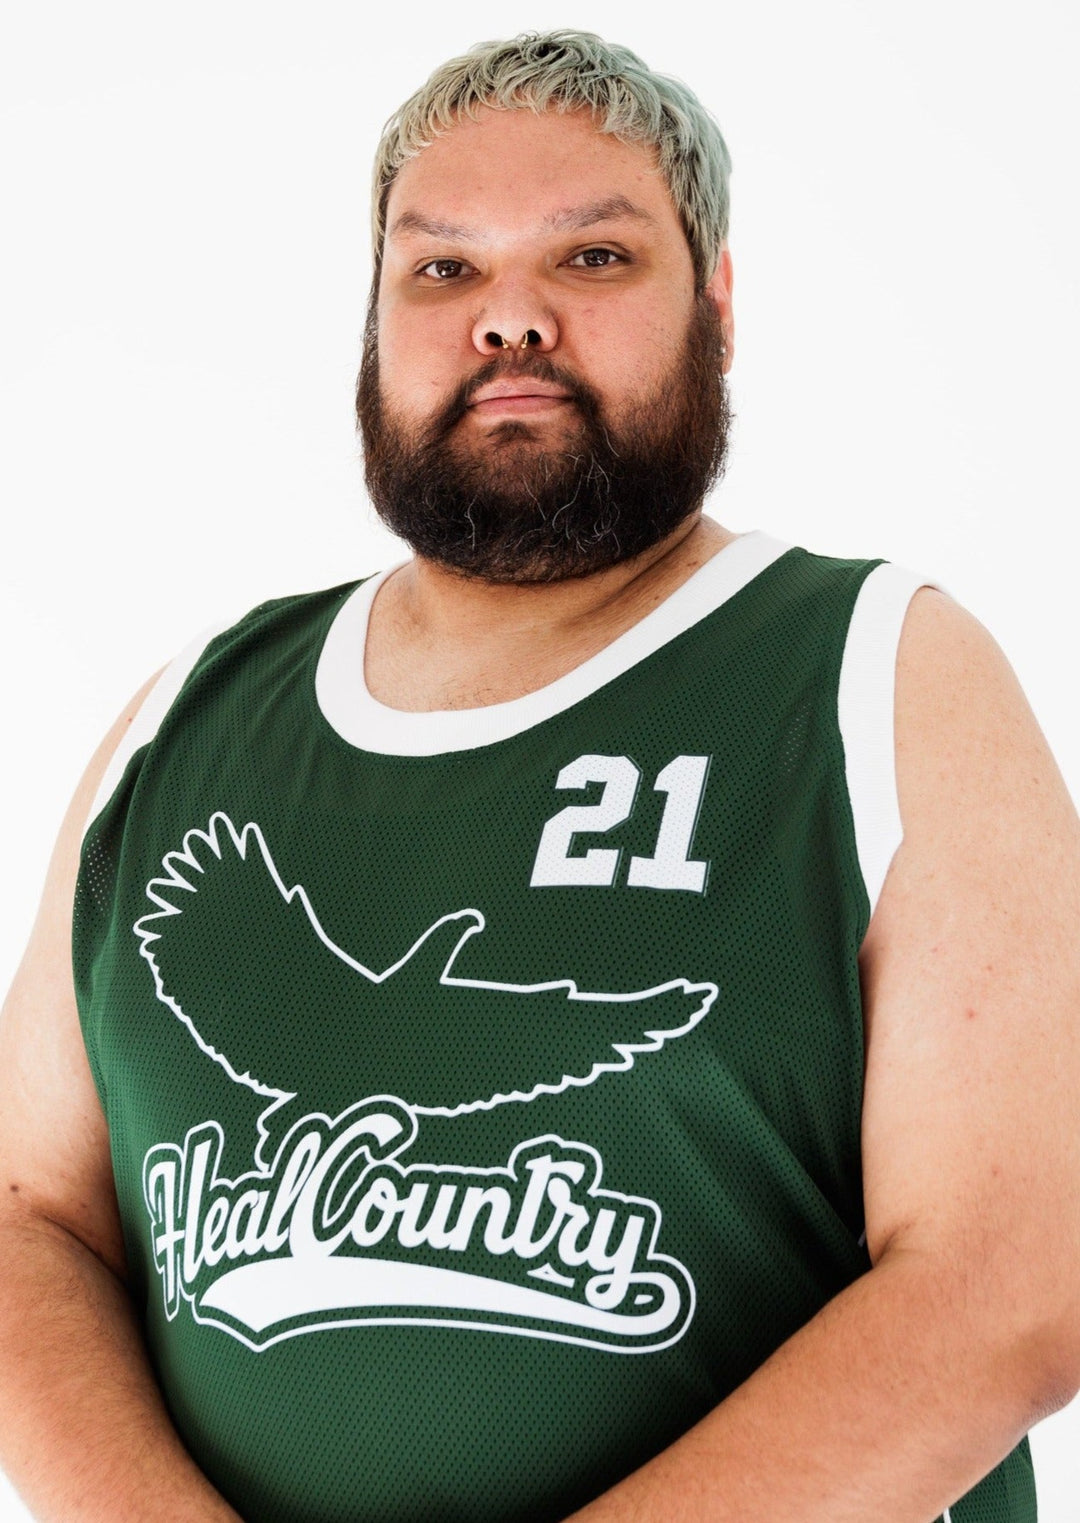 Clothing The Gaps. Heal Country Basketball Jersey. Dark green back ground with outlined Bunjil the Eagle, the creator spirit and 'Heal Country' text in white on centre of jersey. '21' in bold white numbers on left corner of front. On back of jersey '21' in big white letters in centre. Giving us Boston Celtics energy with white knitted bands around arms and neck.